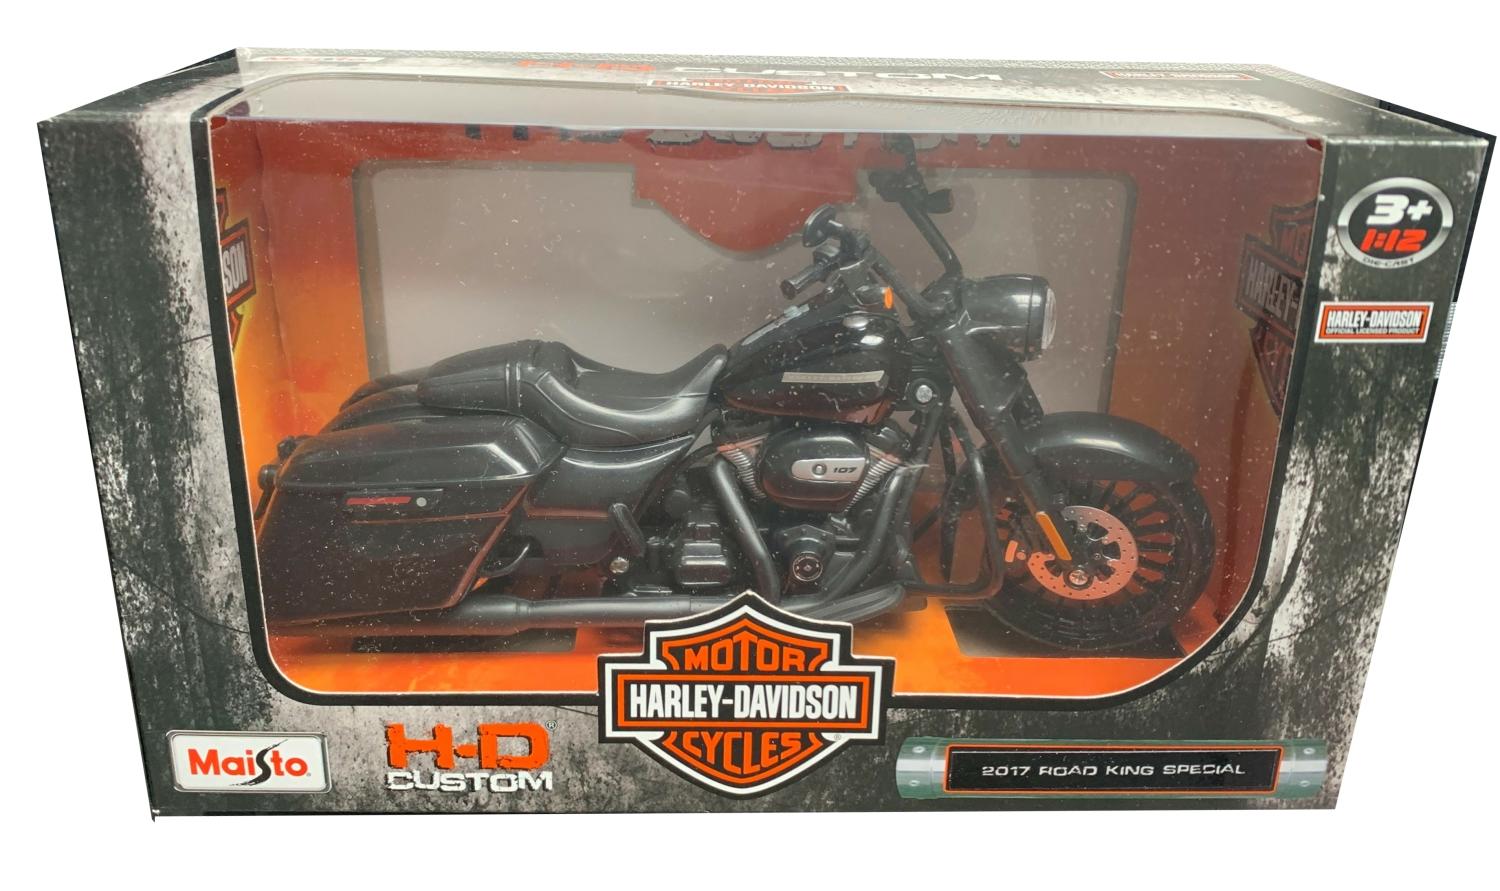 Harley Davidson 2017 Road King Special in black 1:12 scale model from Maisto